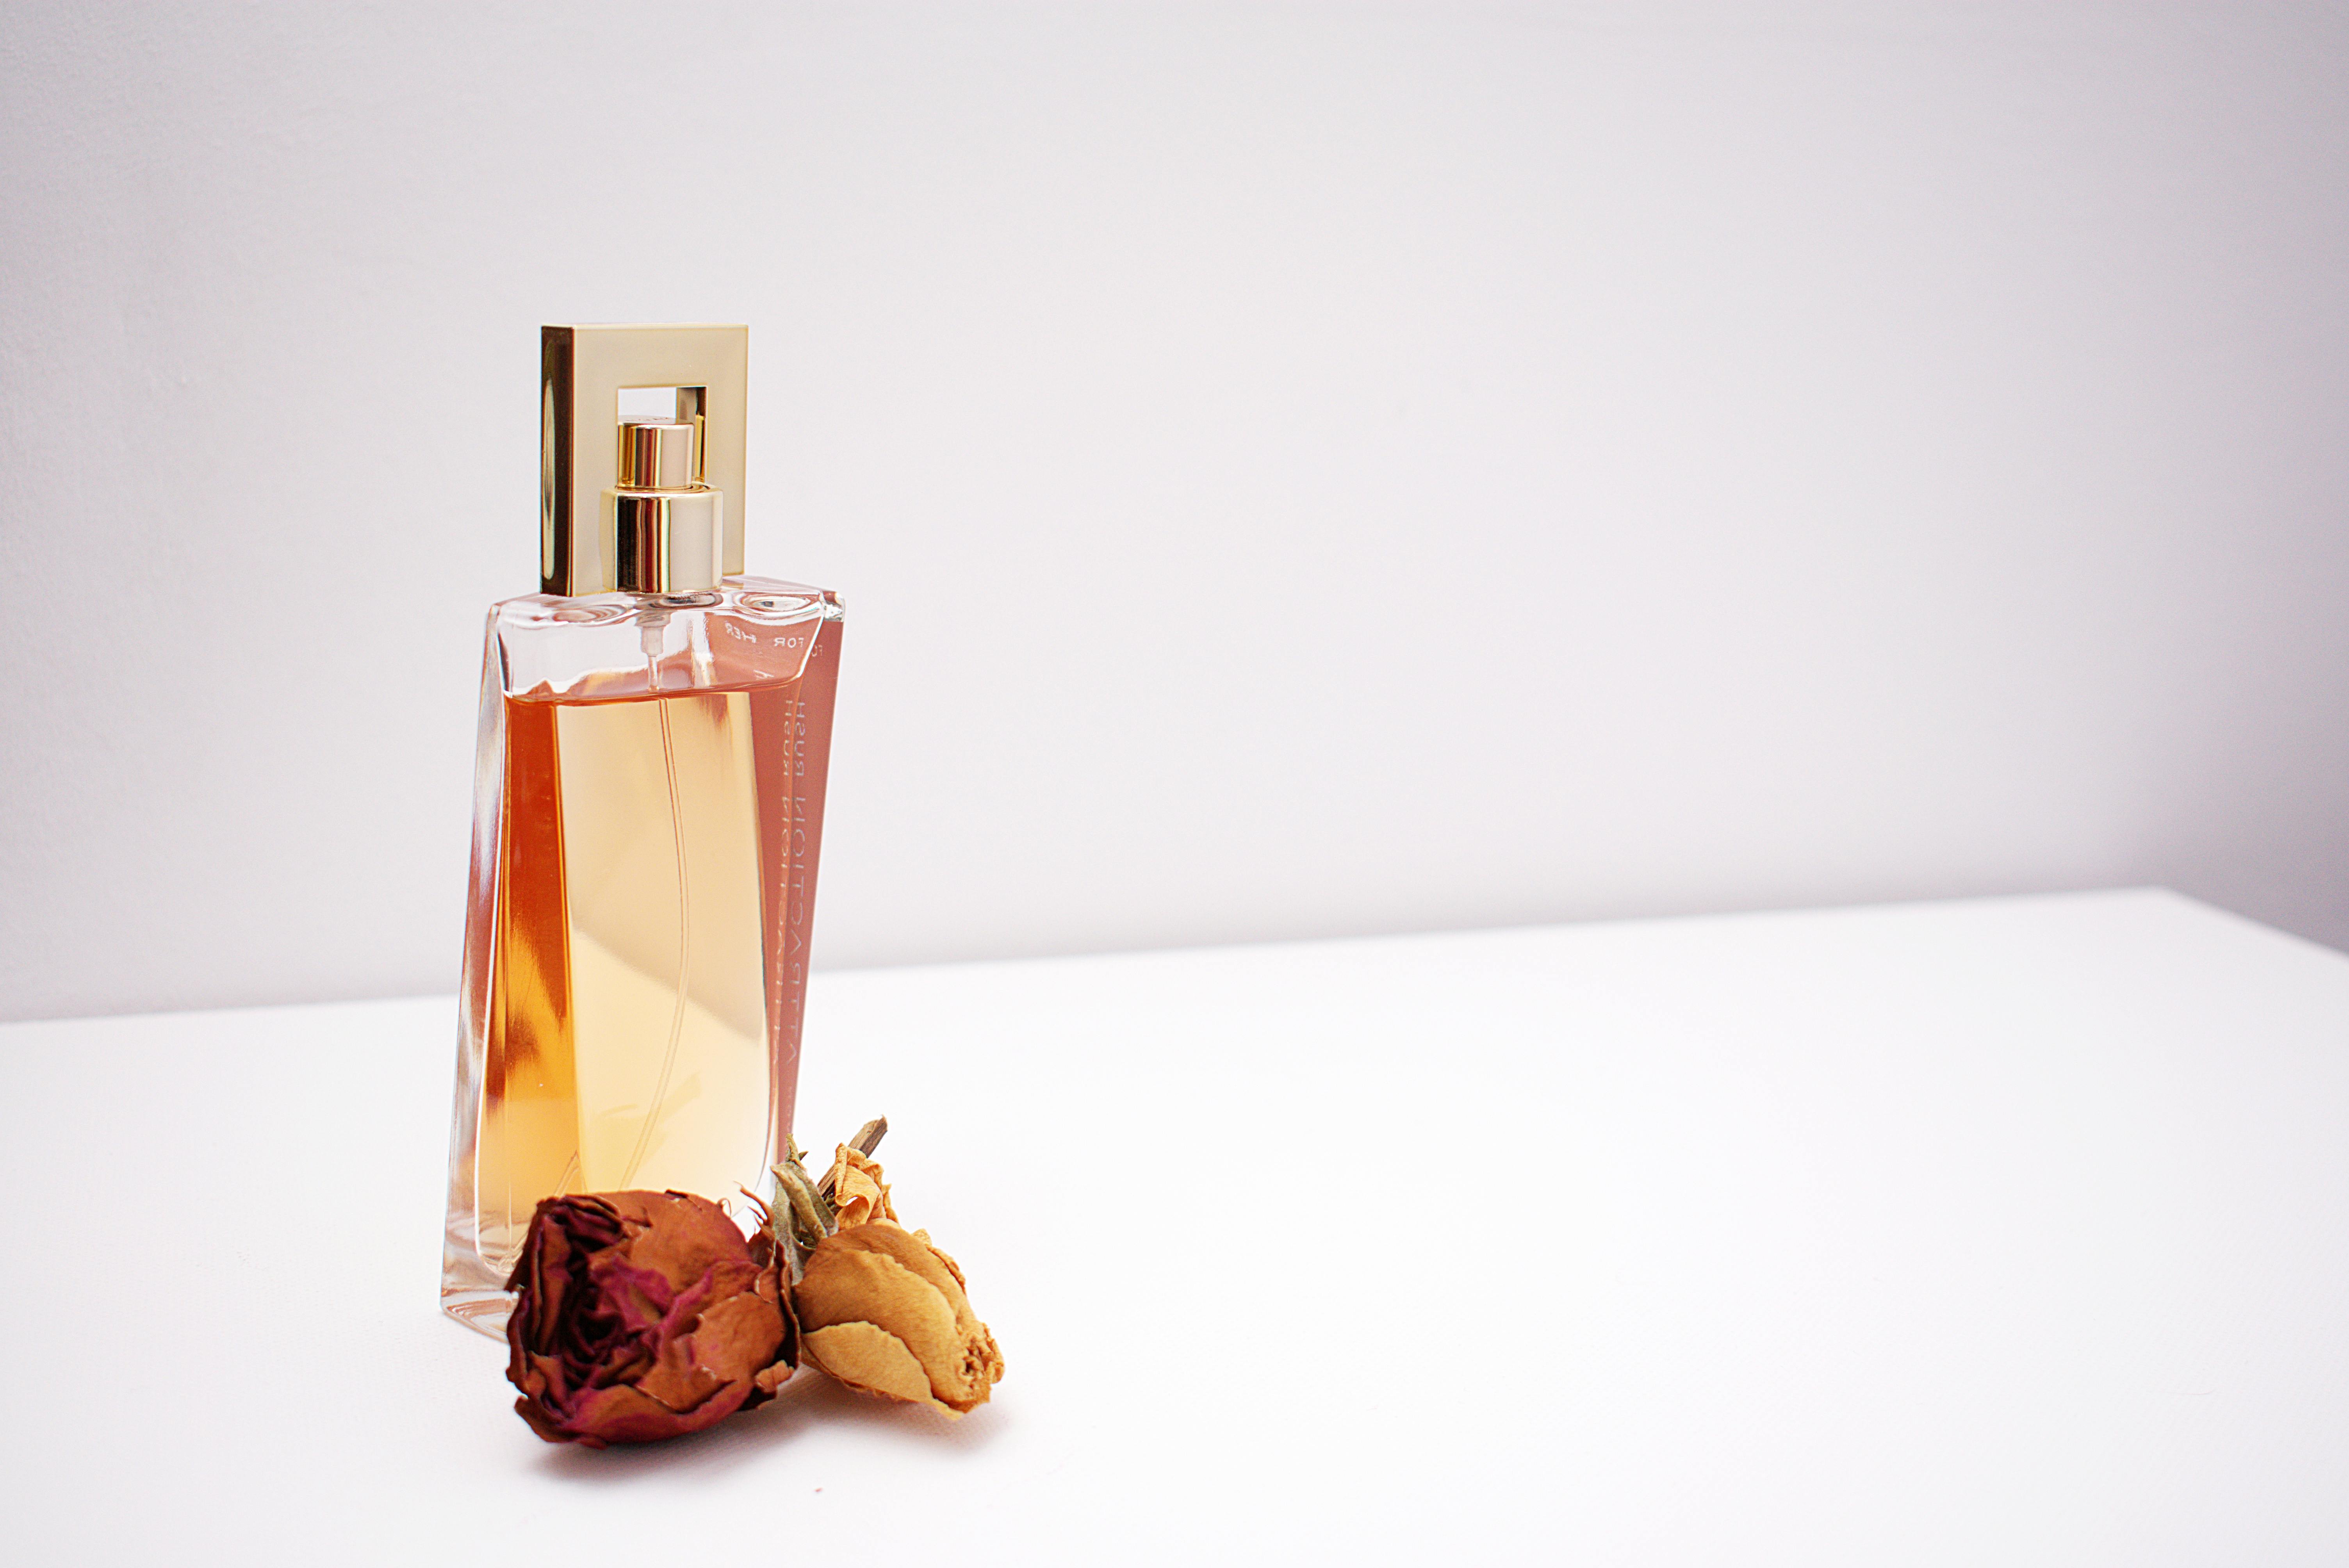 Perfume Photos, Download The BEST Free Perfume Stock Photos & HD Images